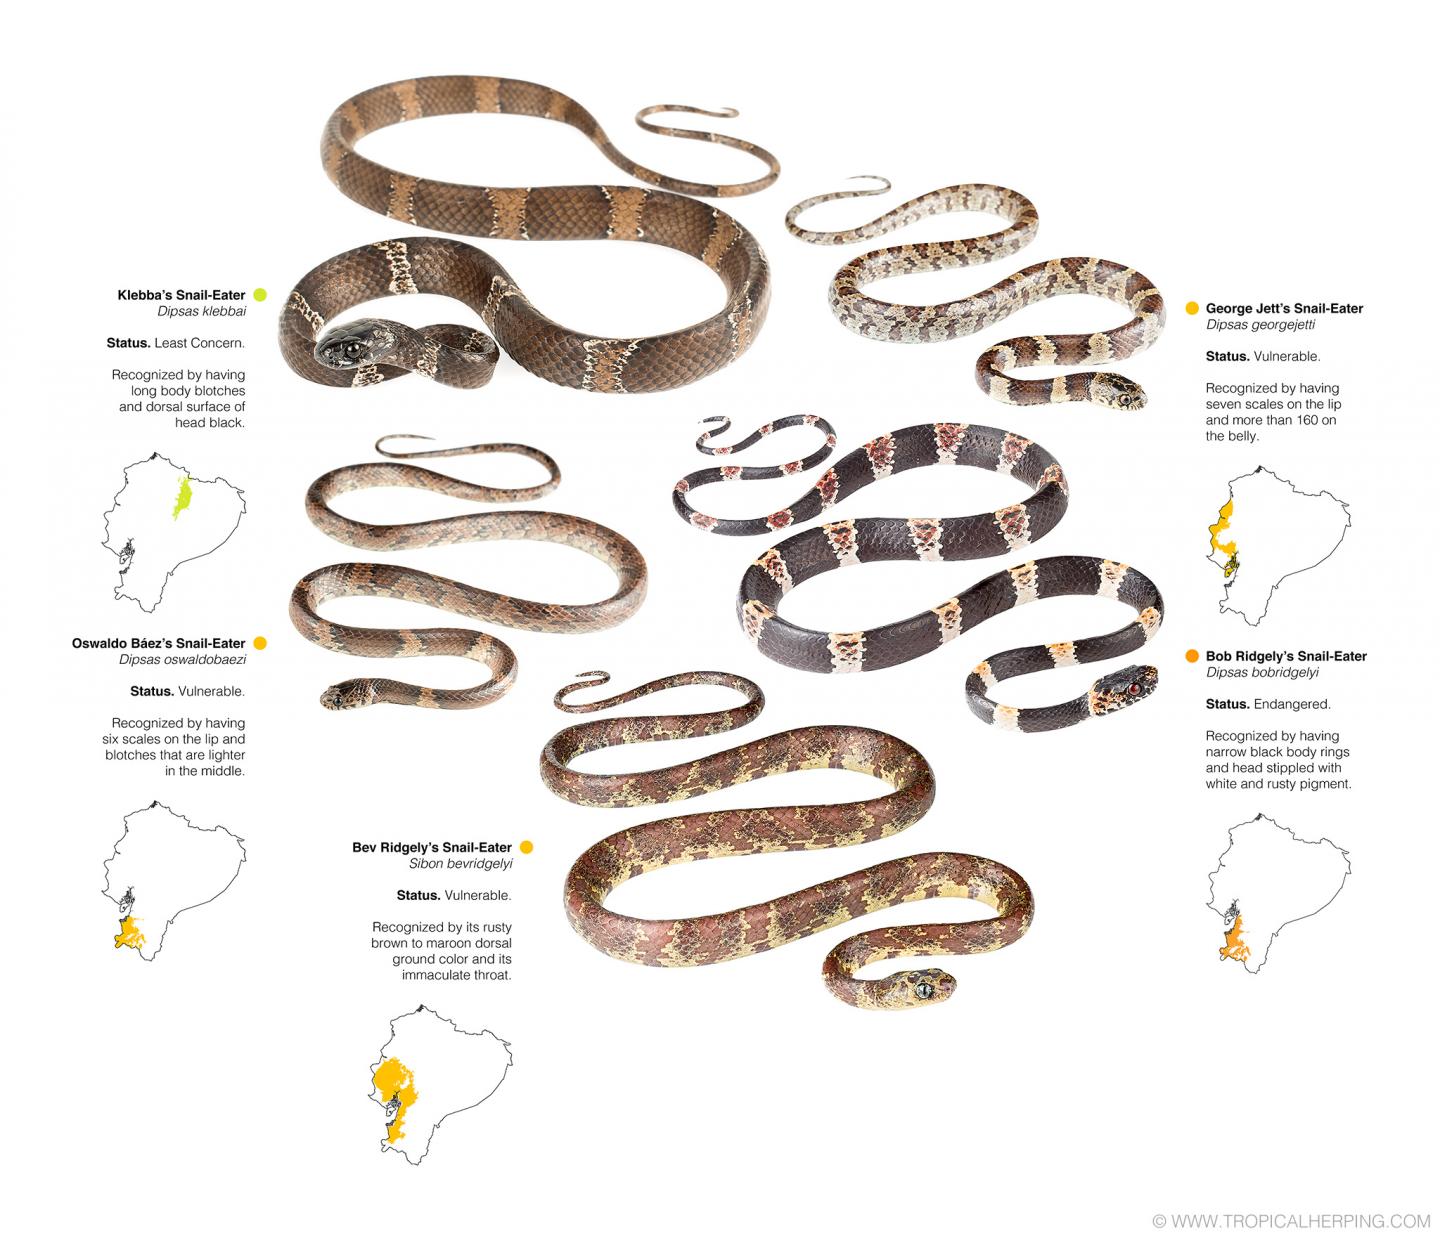 Newly Discovered Snakes